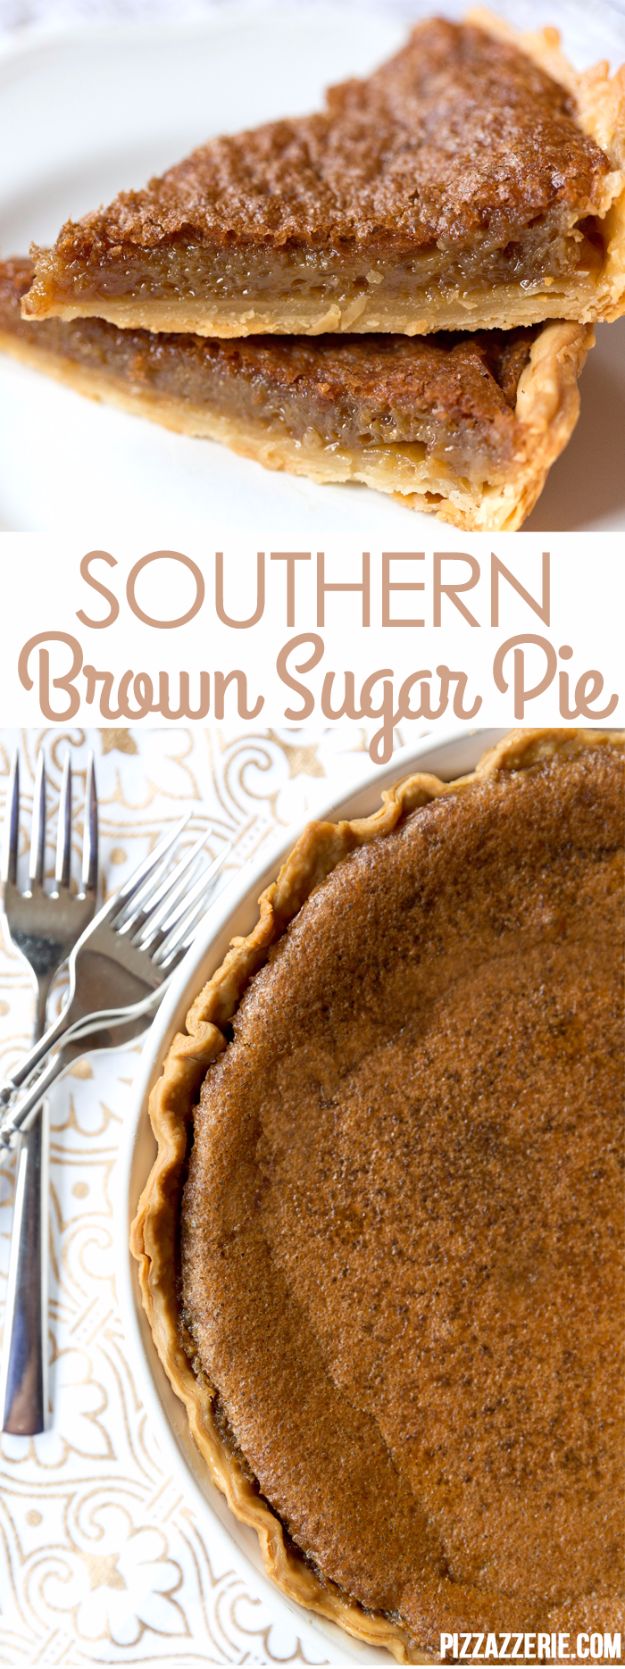 Best Country Cooking Recipes - Southern Brown Sugar Pie - Easy Recipes for Country Food Like Chicken Fried Steak, Fried Green Tomatoes, Southern Gravy, Breads and Biscuits, Casseroles and More - Breakfast, Lunch and Dinner Recipe Ideas for Families and Feeding A Crowd - Step by Step Instructions for Making Homestyle Dips, Snacks, Desserts #recipes